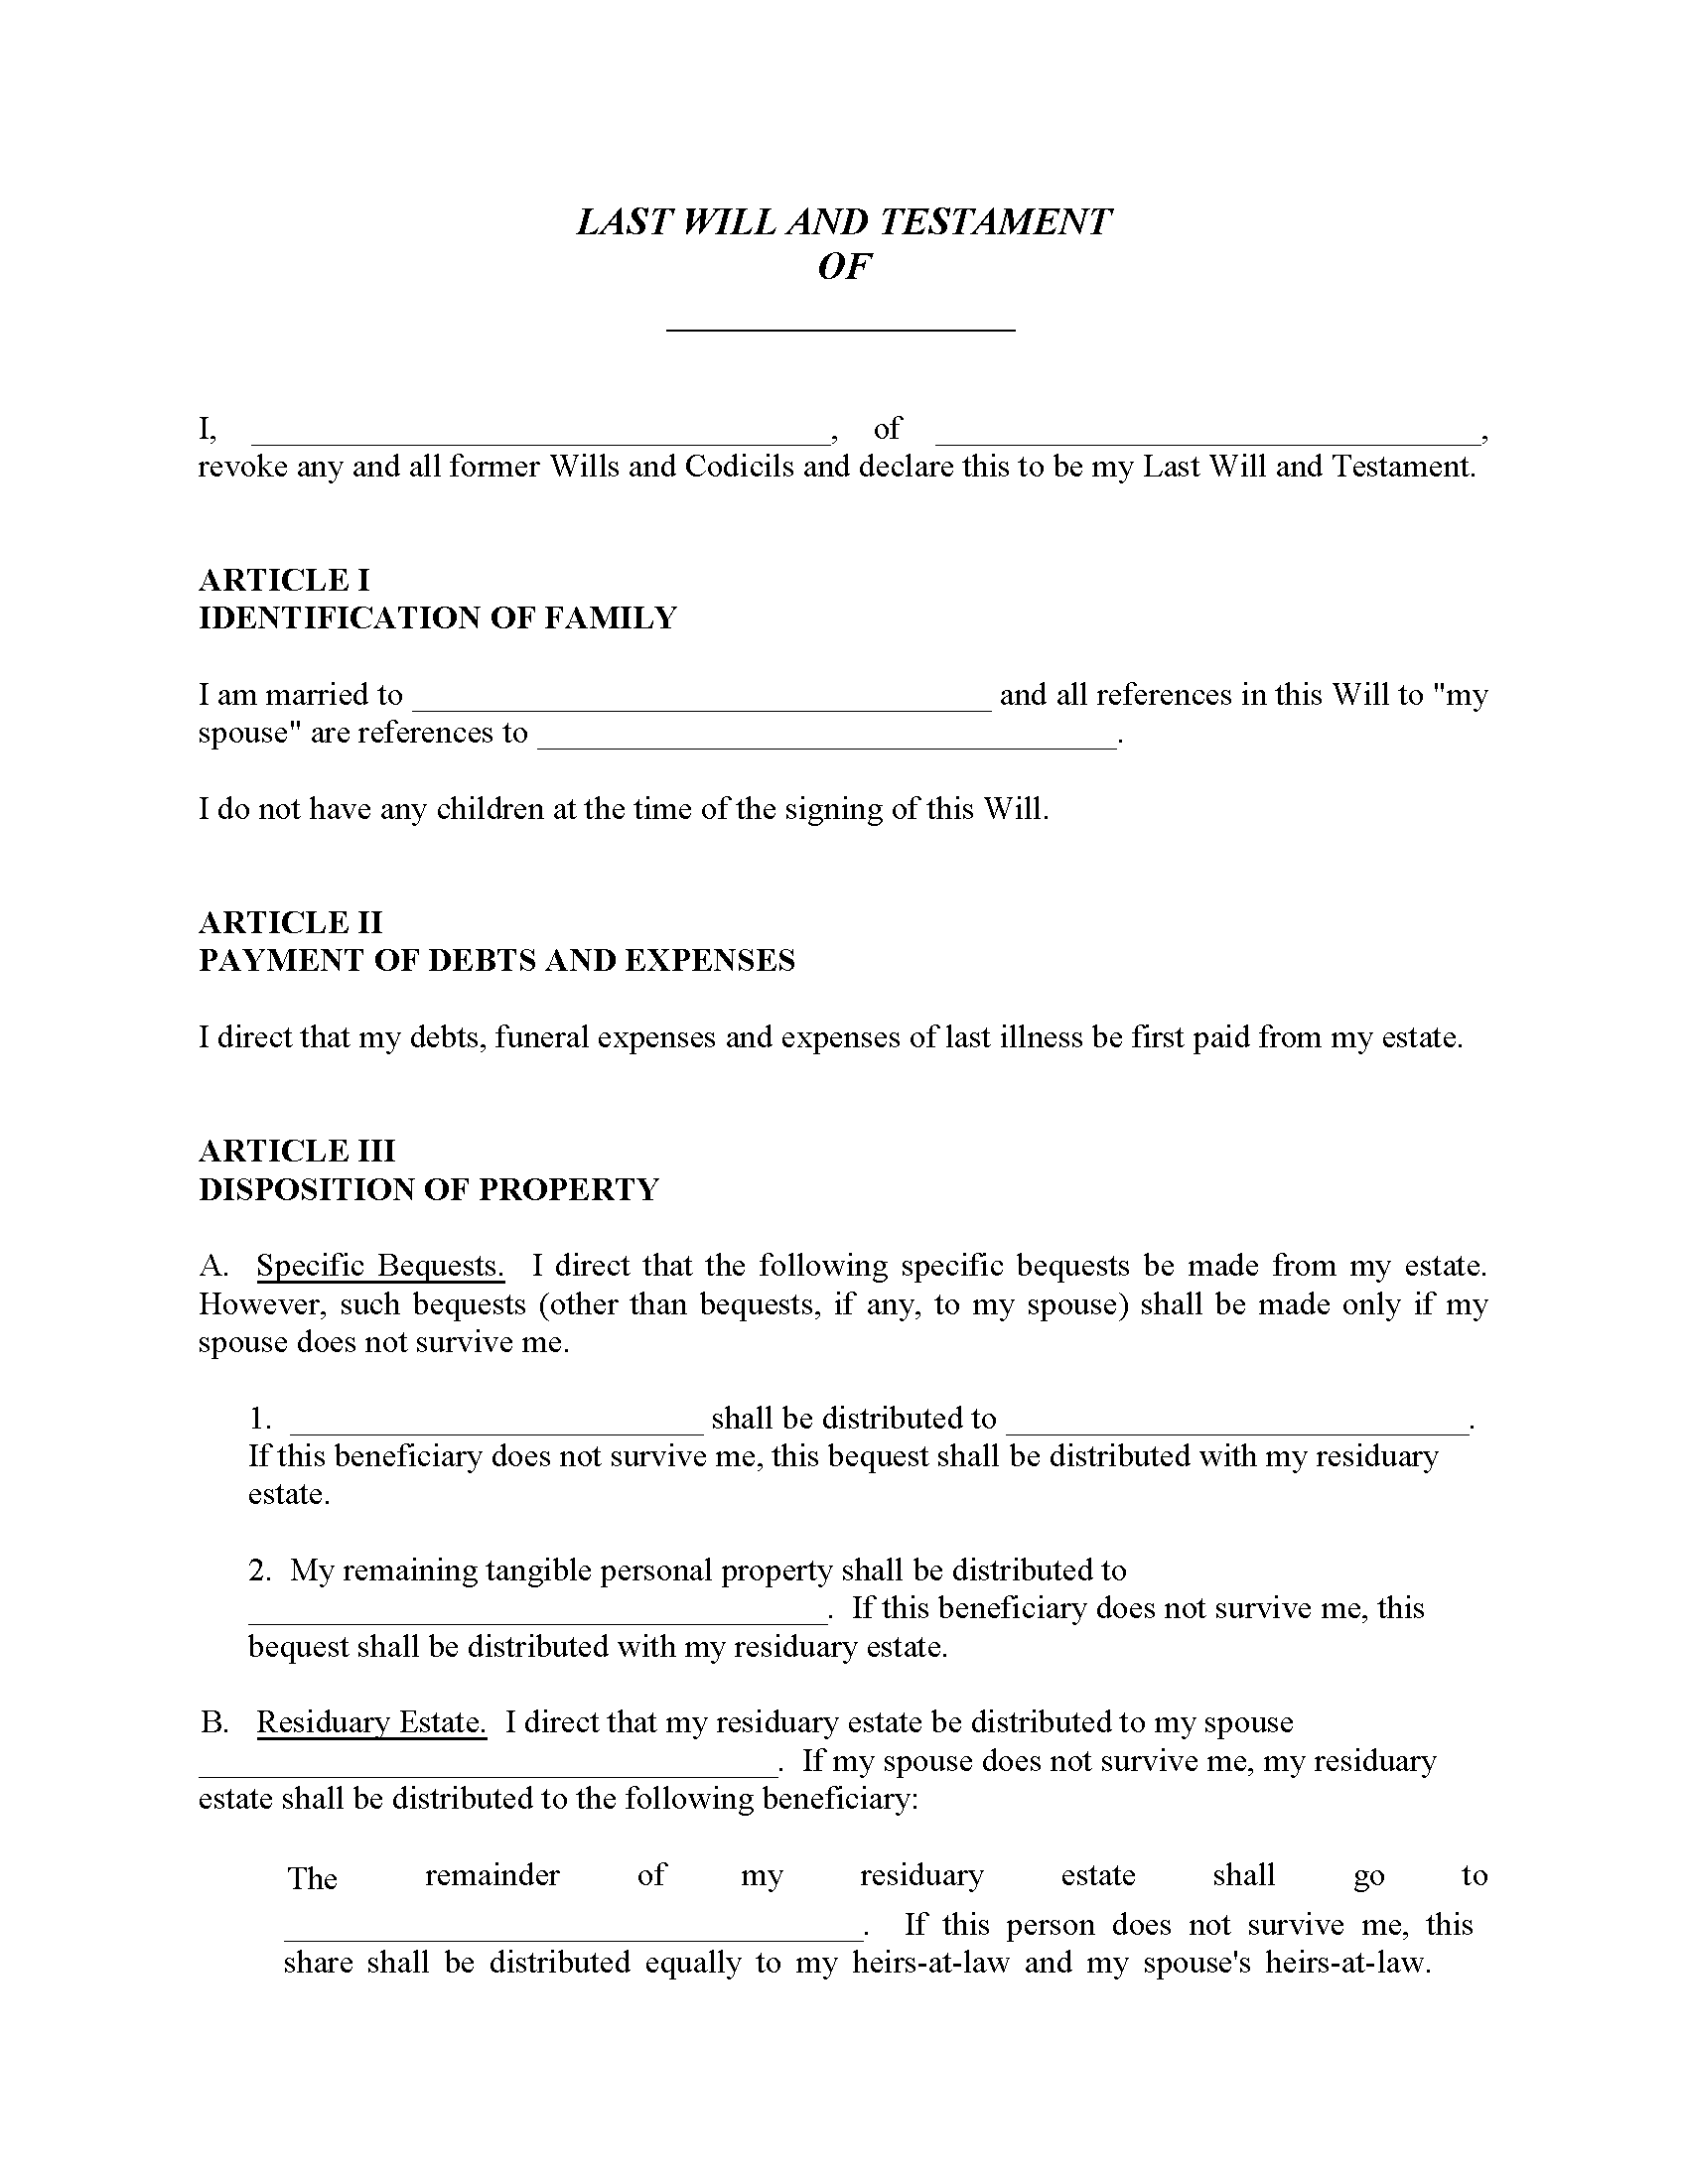 texas-will-for-married-with-no-children-fillable-pdf-free-printable-legal-forms